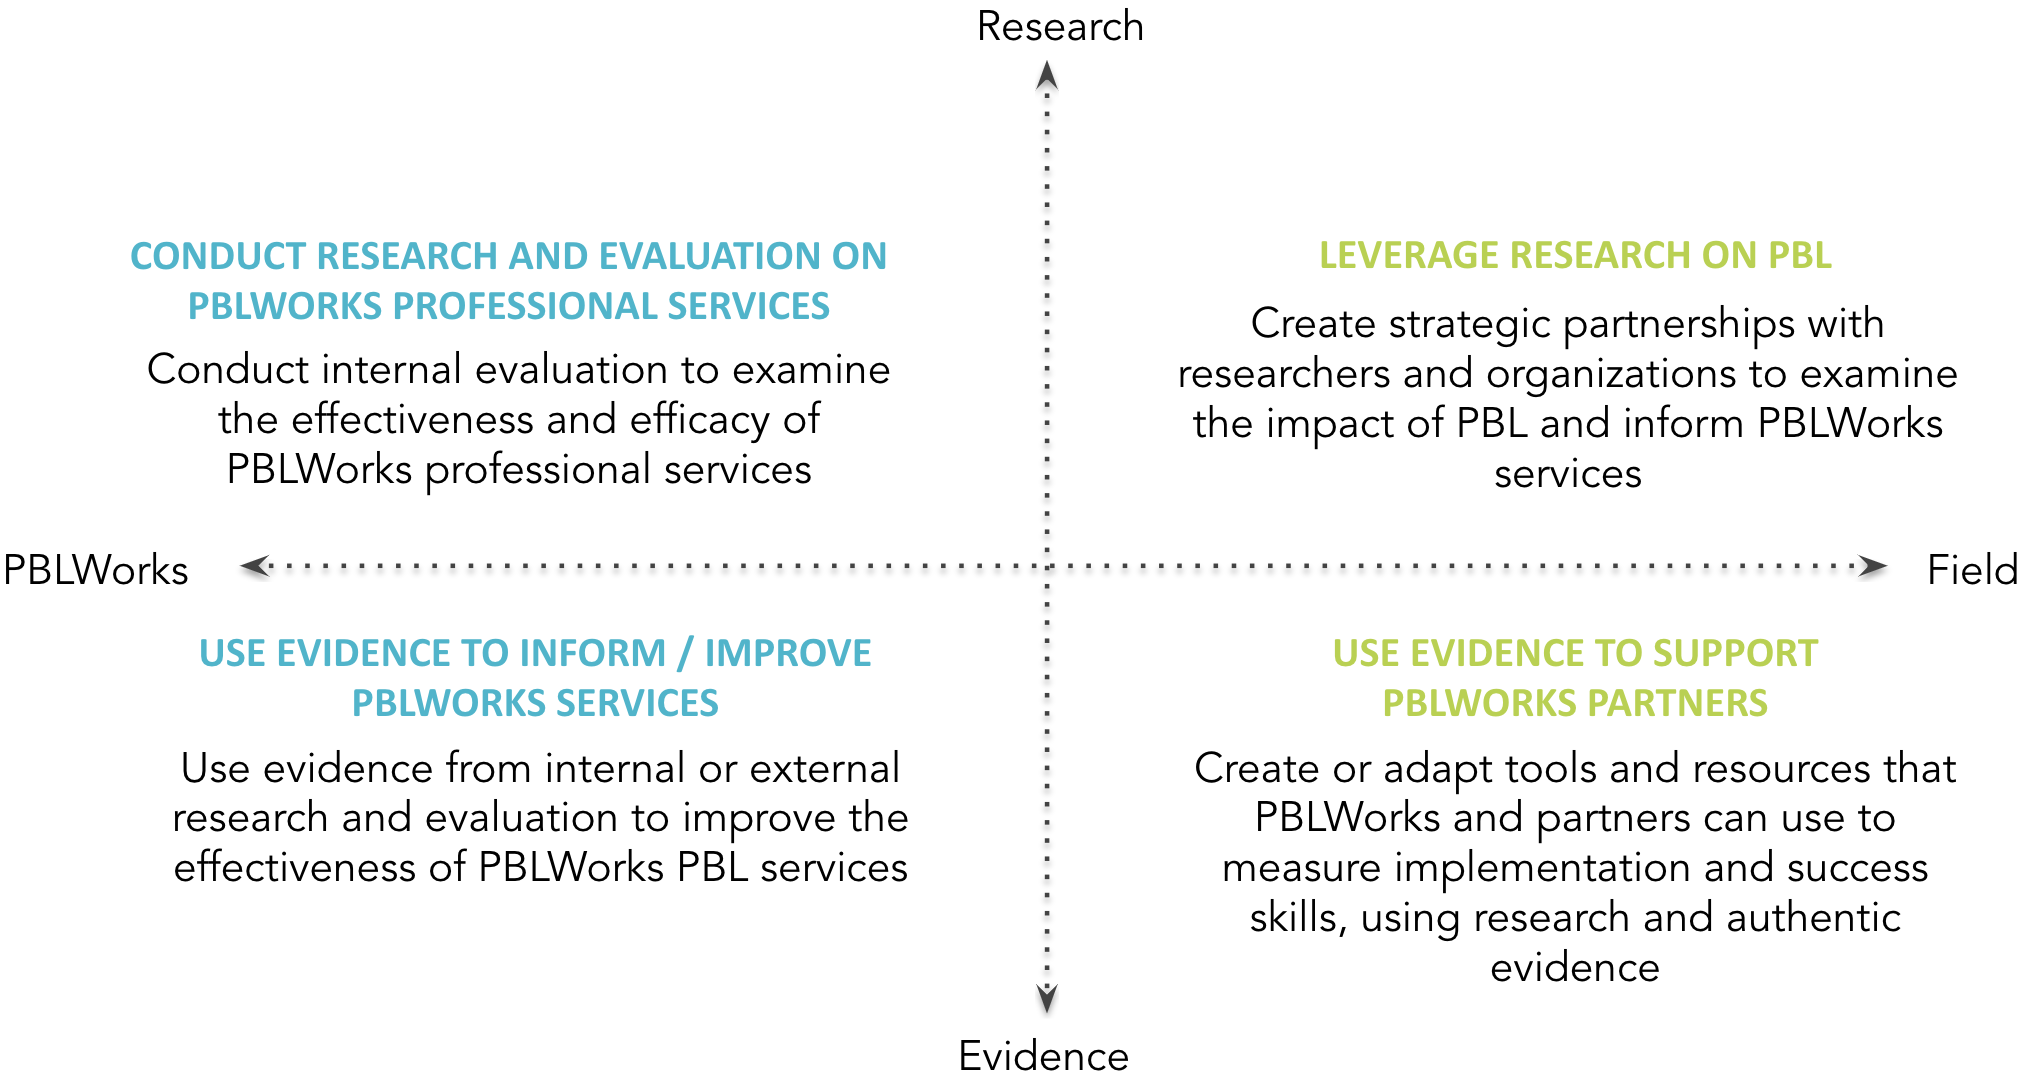 Research and Evidence Sandbox